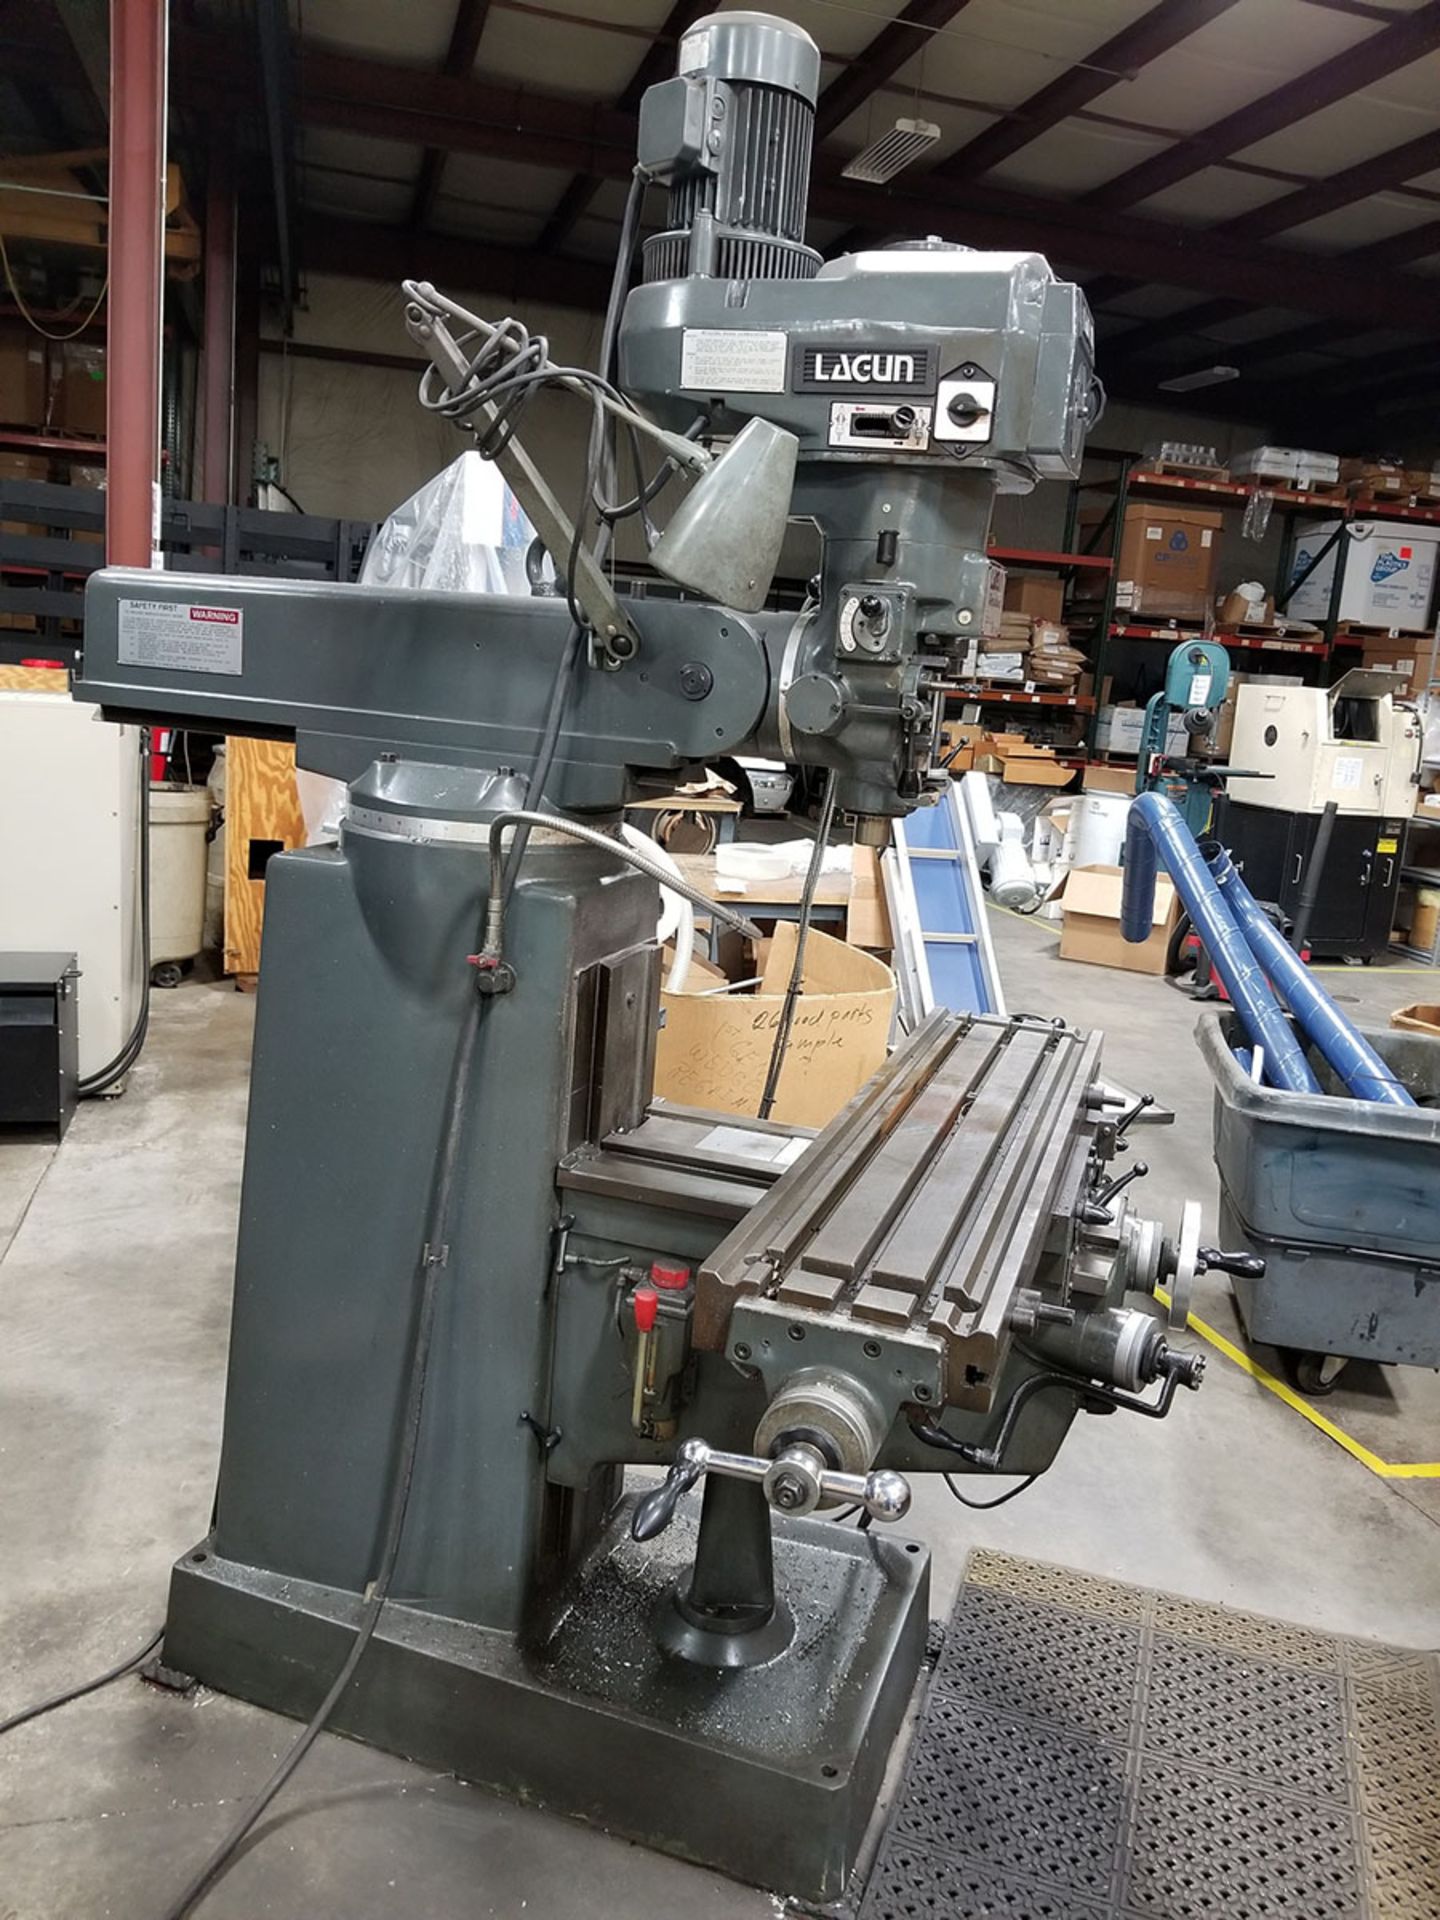 LAGUN REPUBLIC TURRET VERTICAL MILLING MACHINE, SONY MILLMAN LH51 2 AXIS CONTROL, 23'' BACK, 5'' - Image 9 of 13